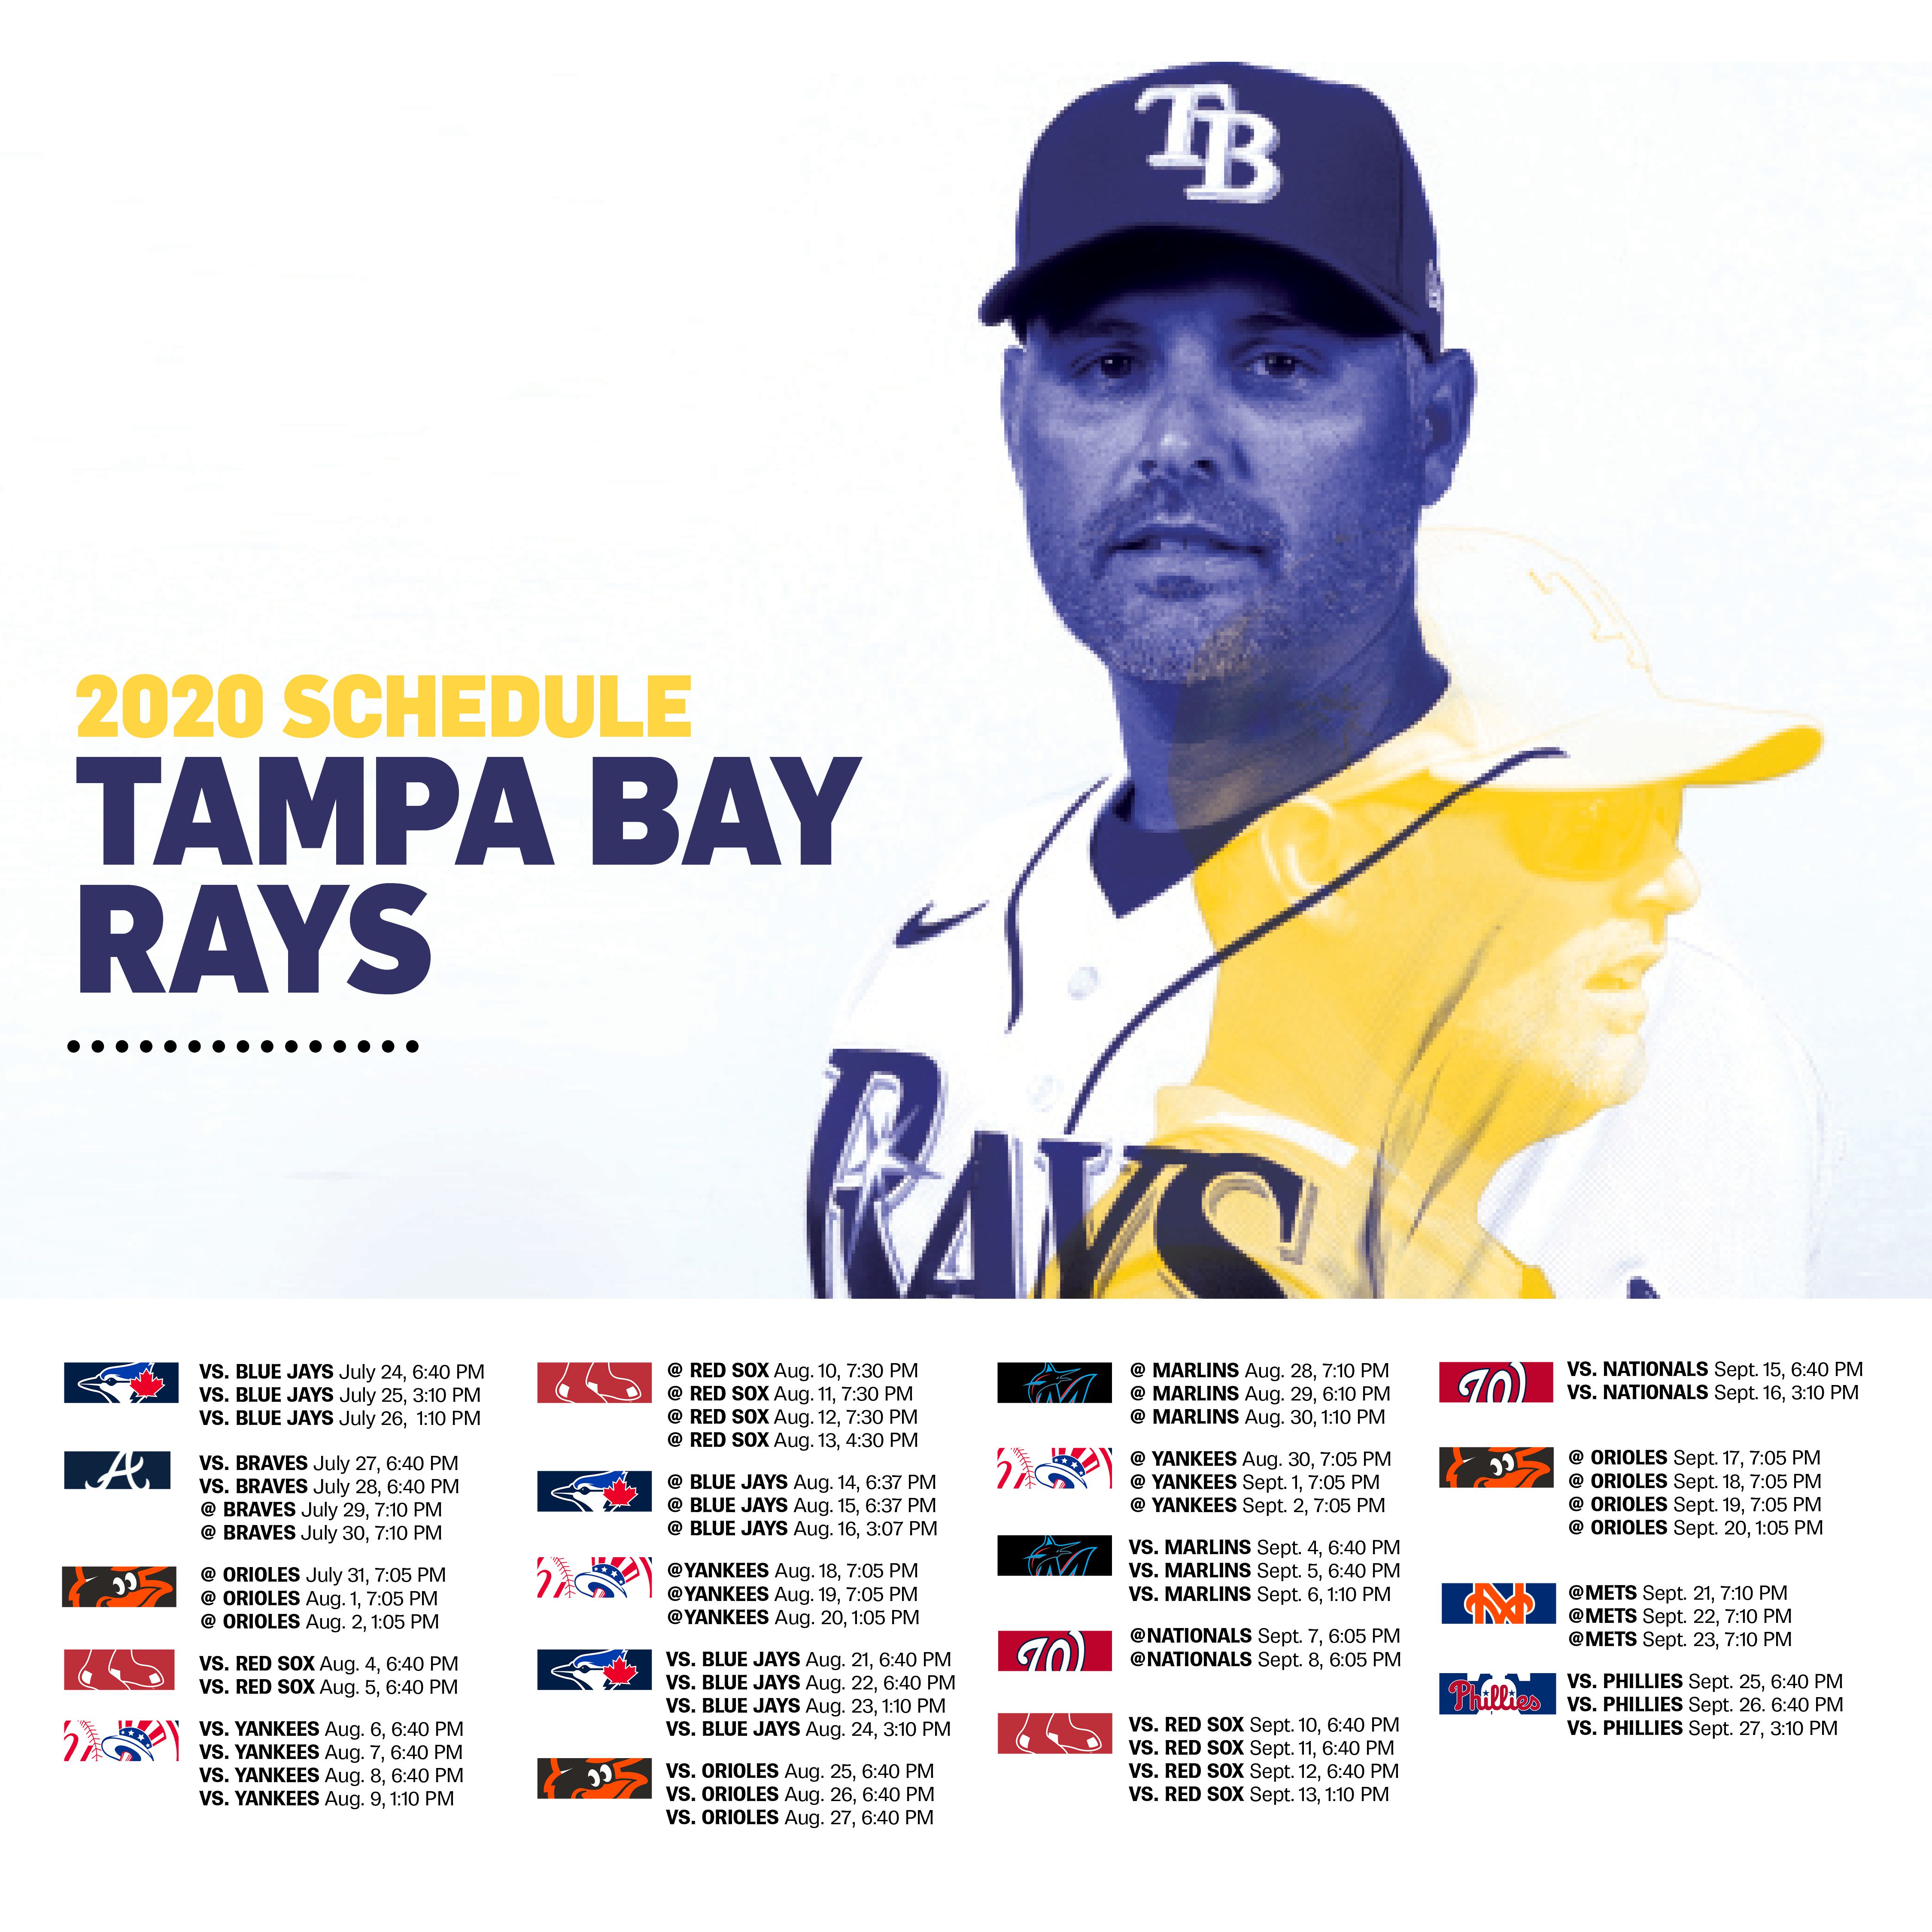 Rays 2020 schedule is out. It presents challenges.